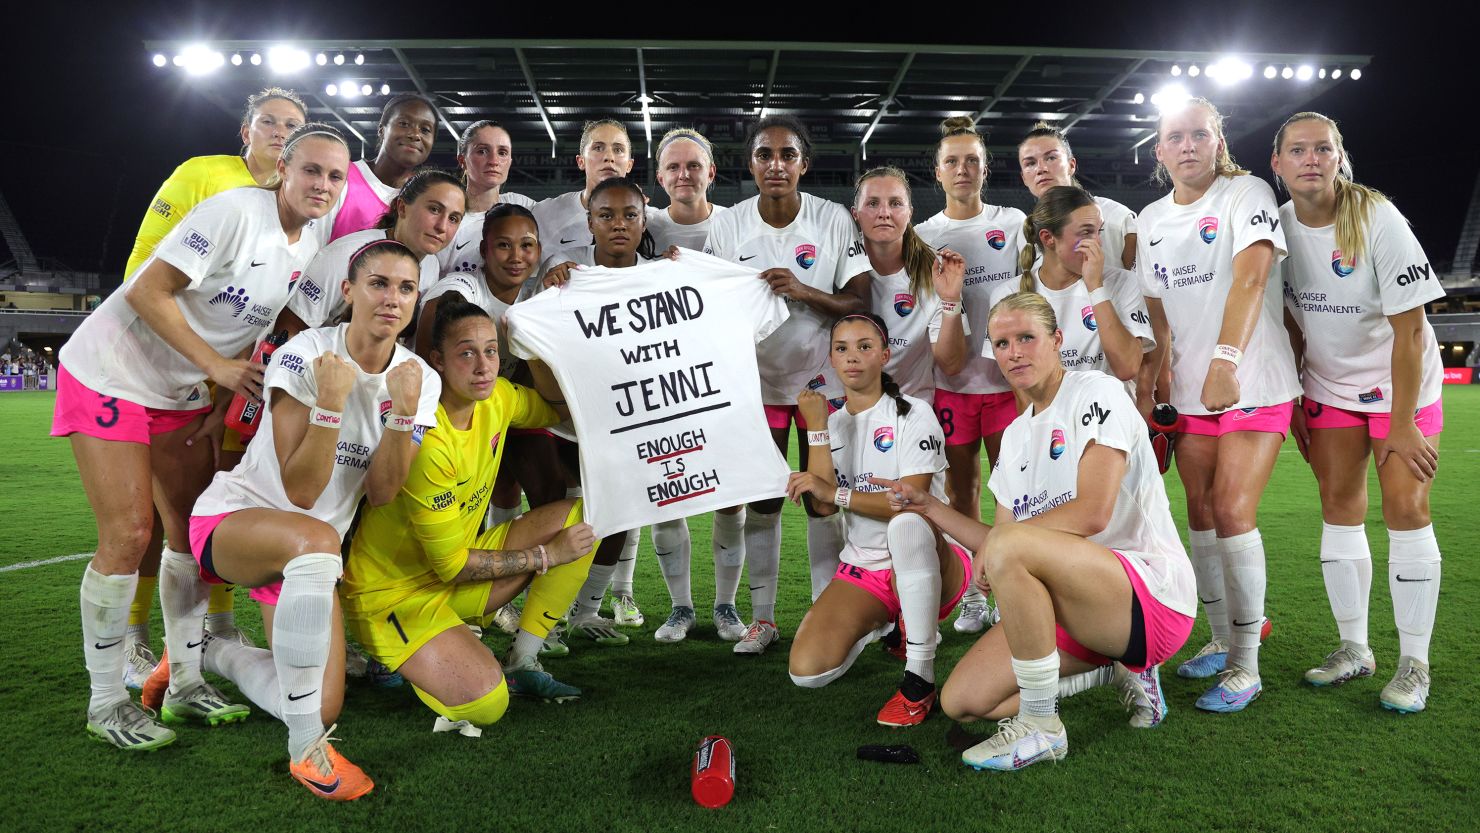 The top 11 women's football players to follow on social media